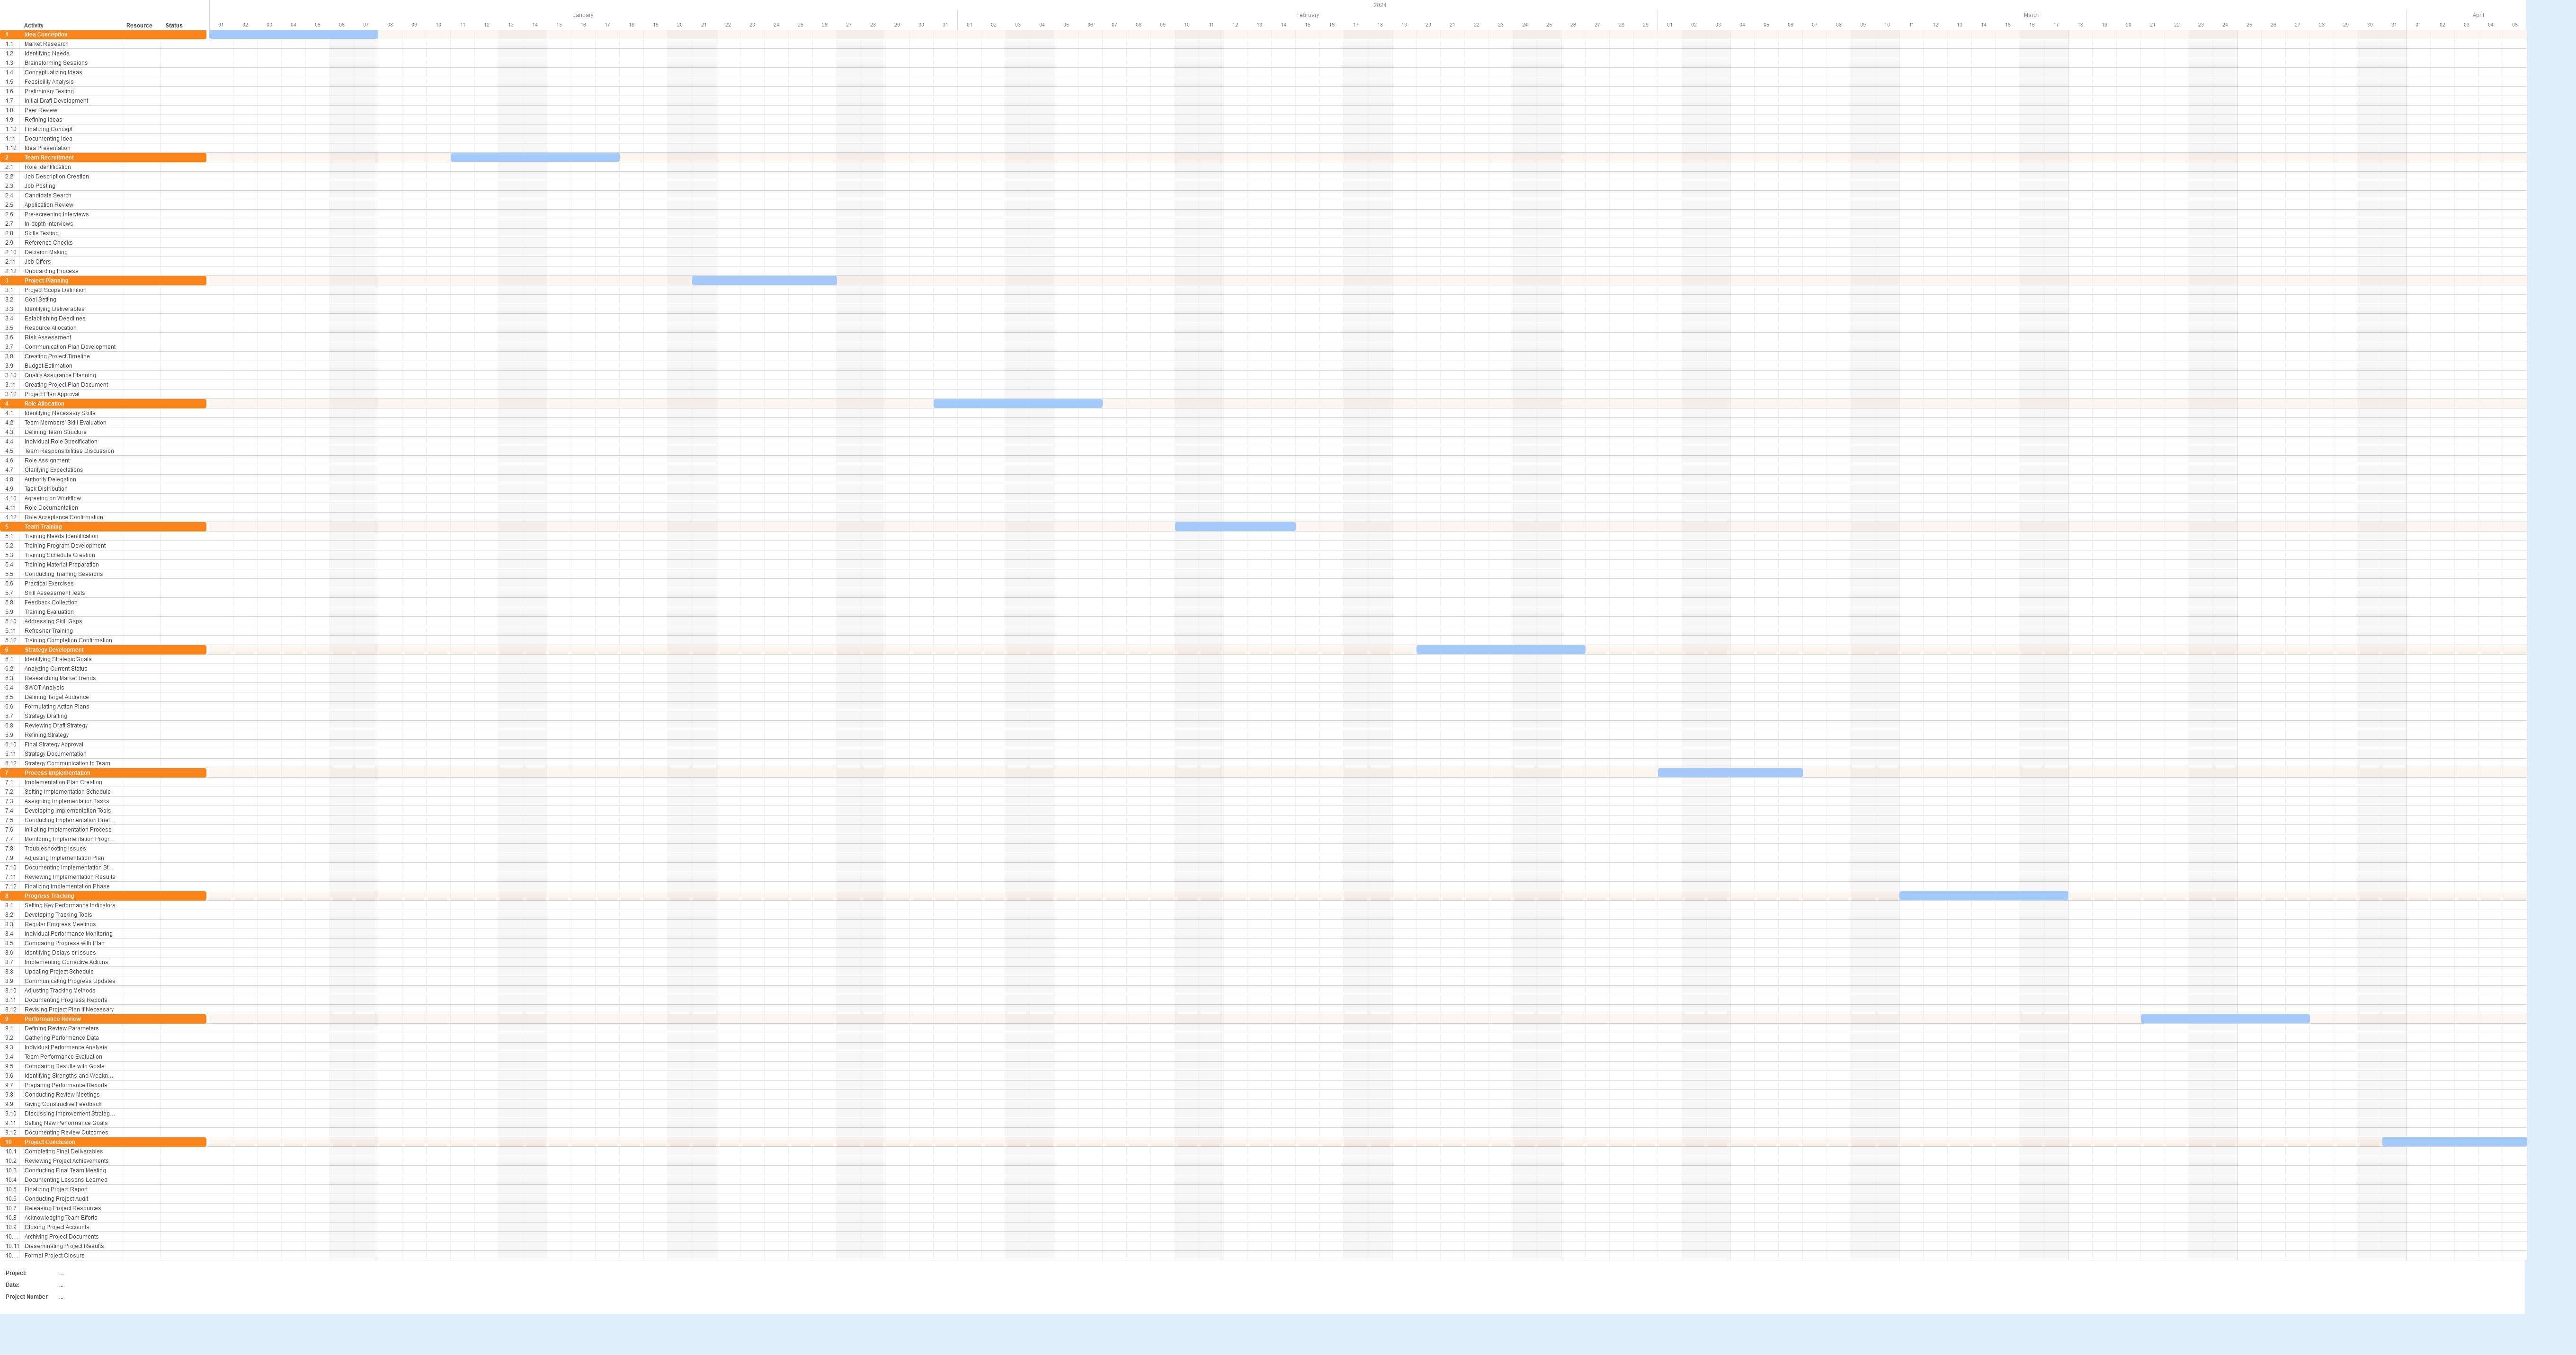 Gantt chart for a Founders team formation project